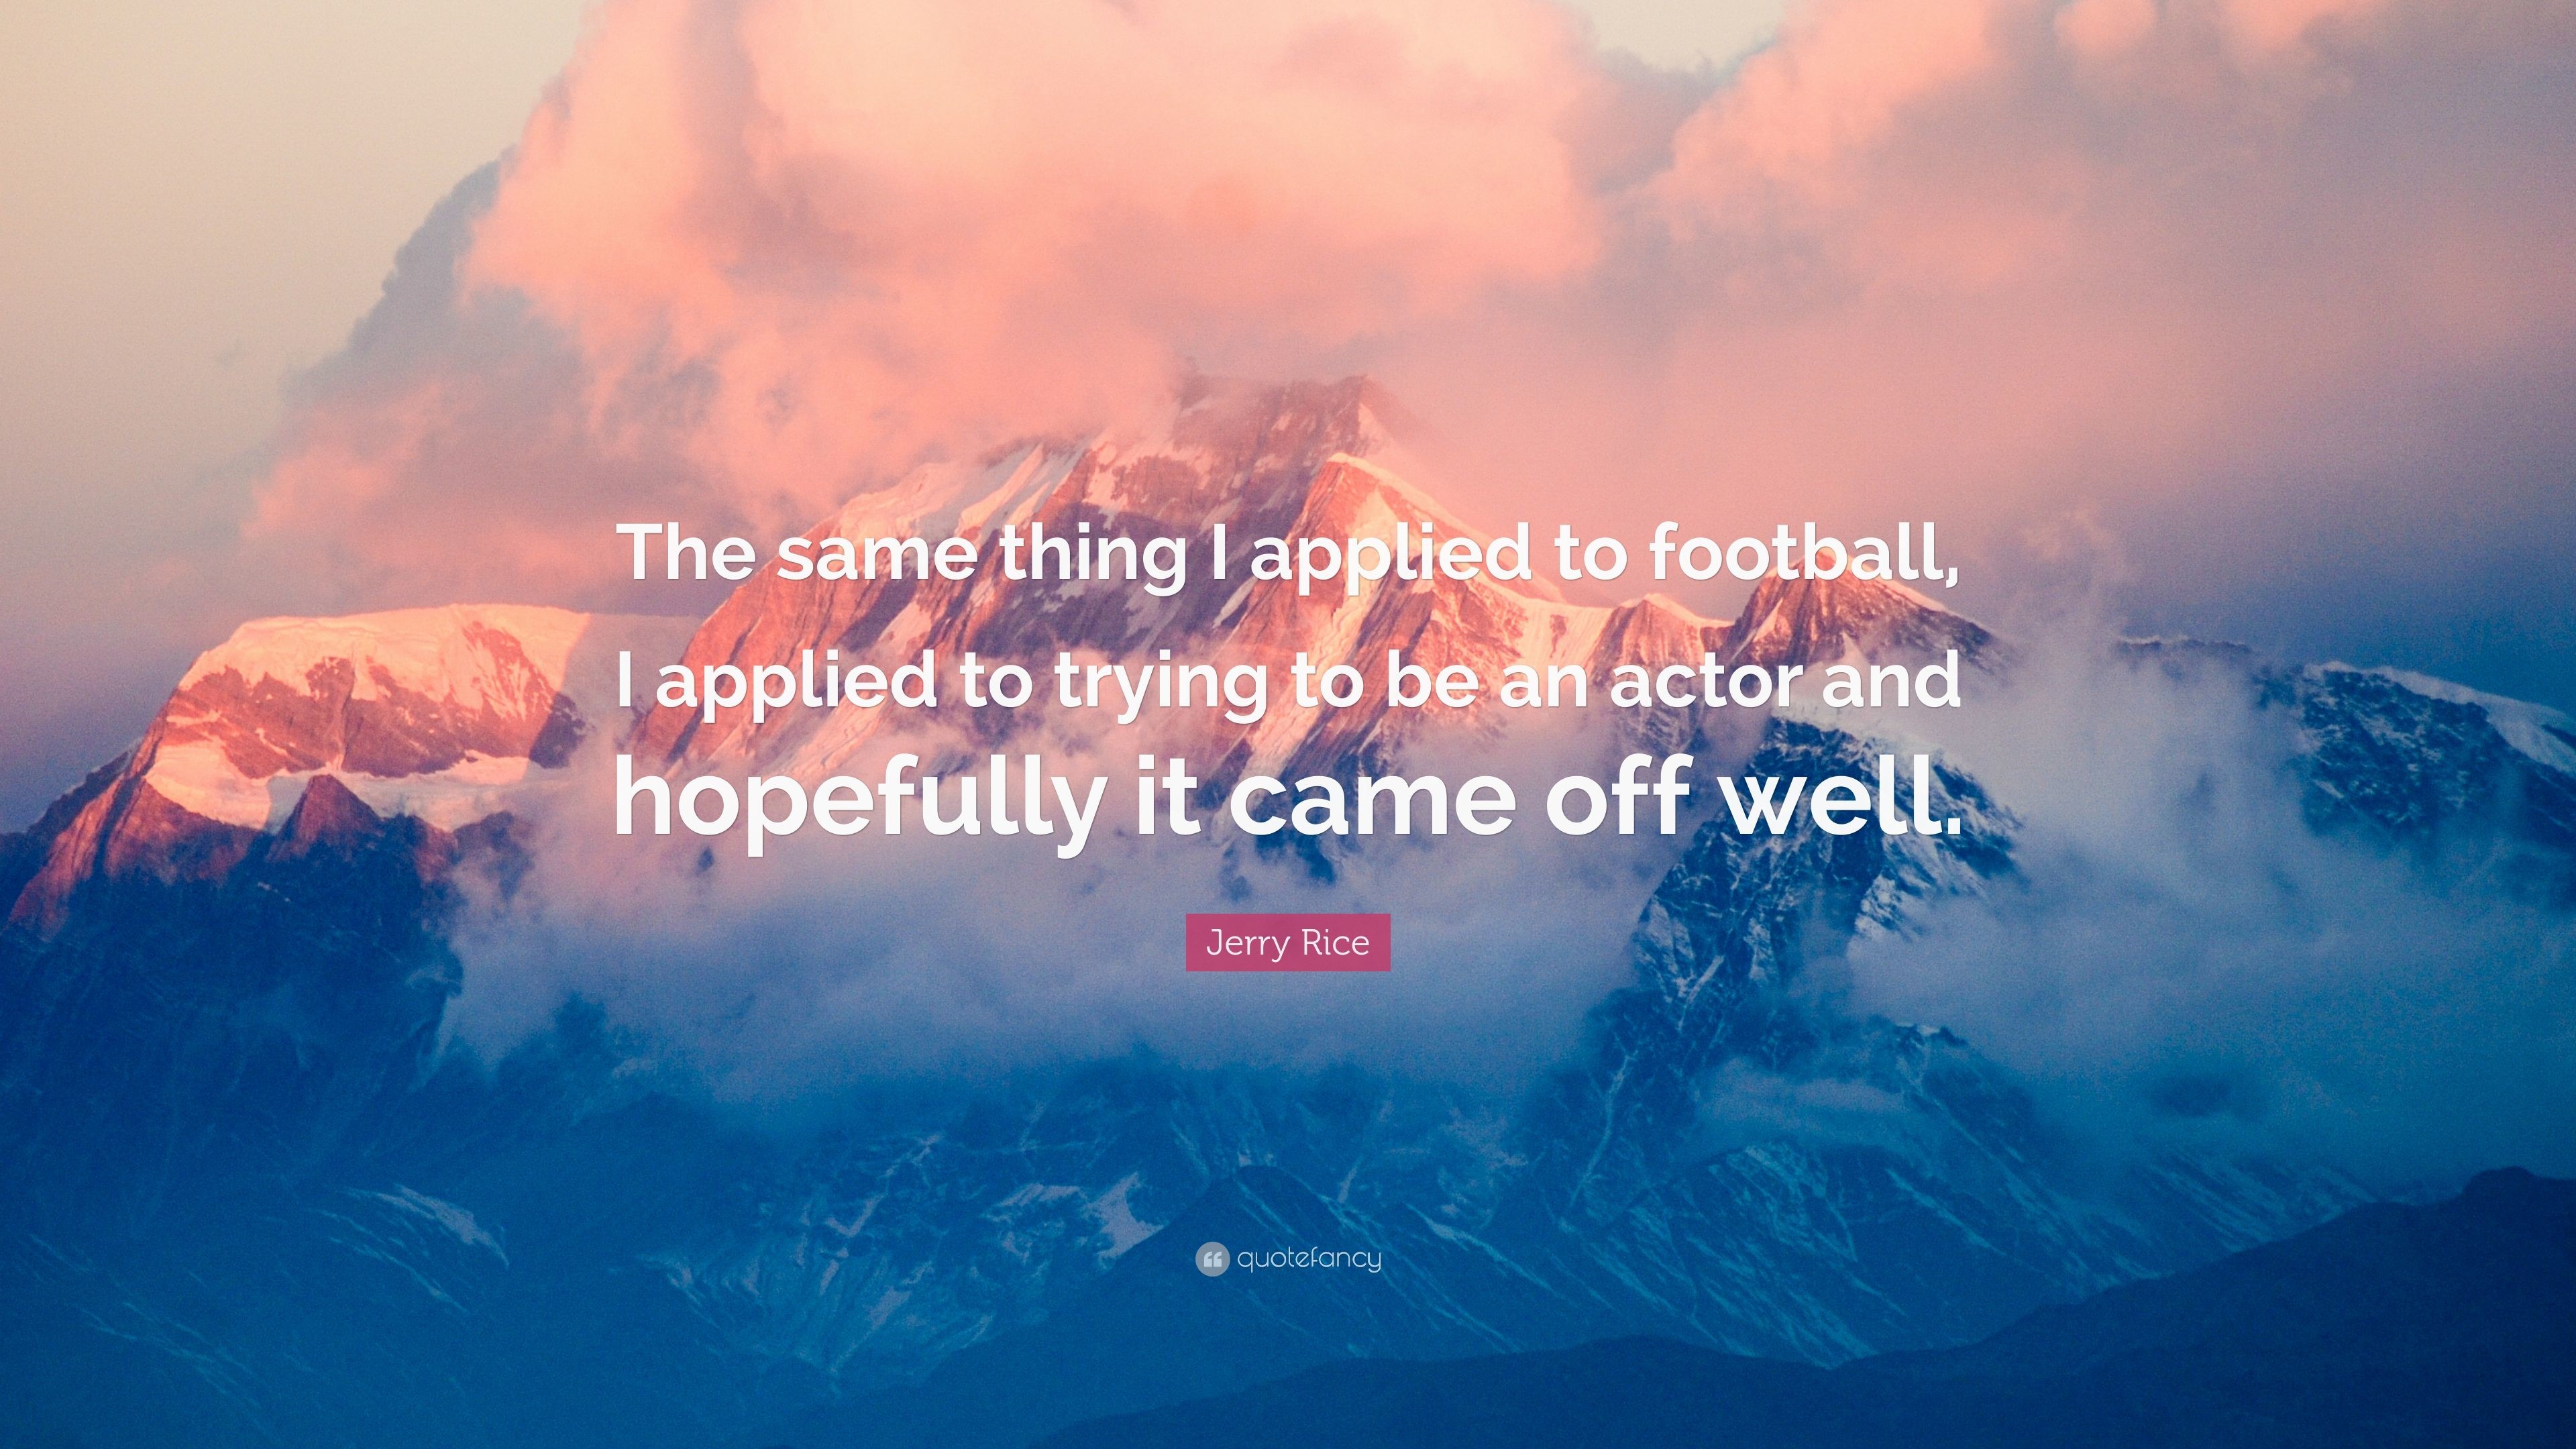 Jerry Rice Quote The same thing I applied to football, I applied to